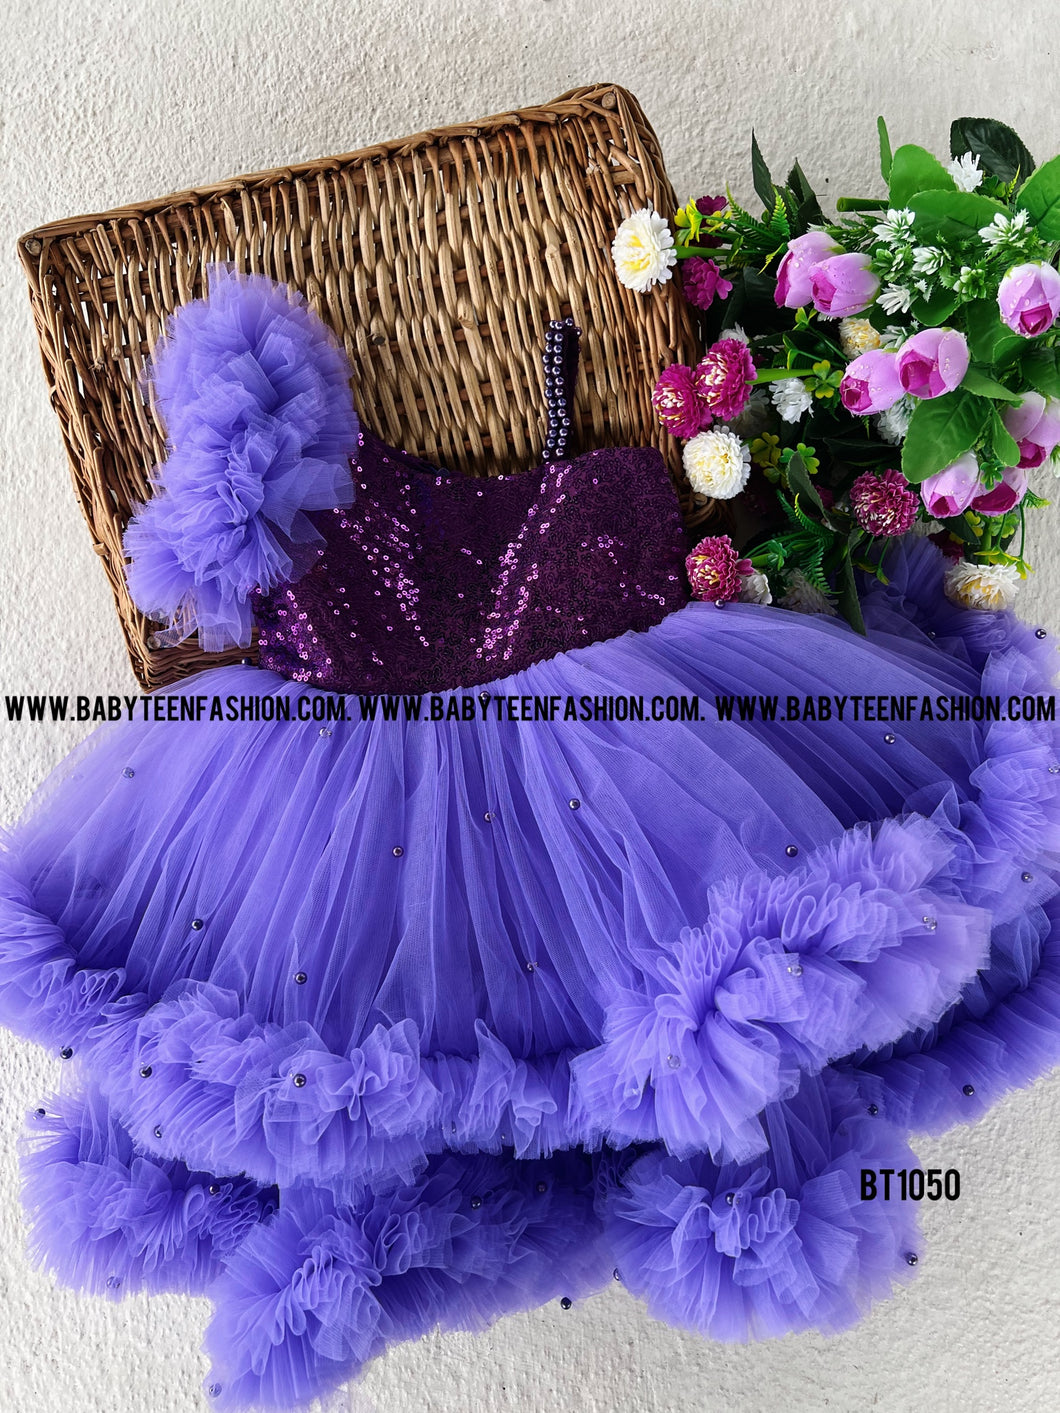 BT1050 Lavender Luxe Princess Gown - A Whisper of Elegance